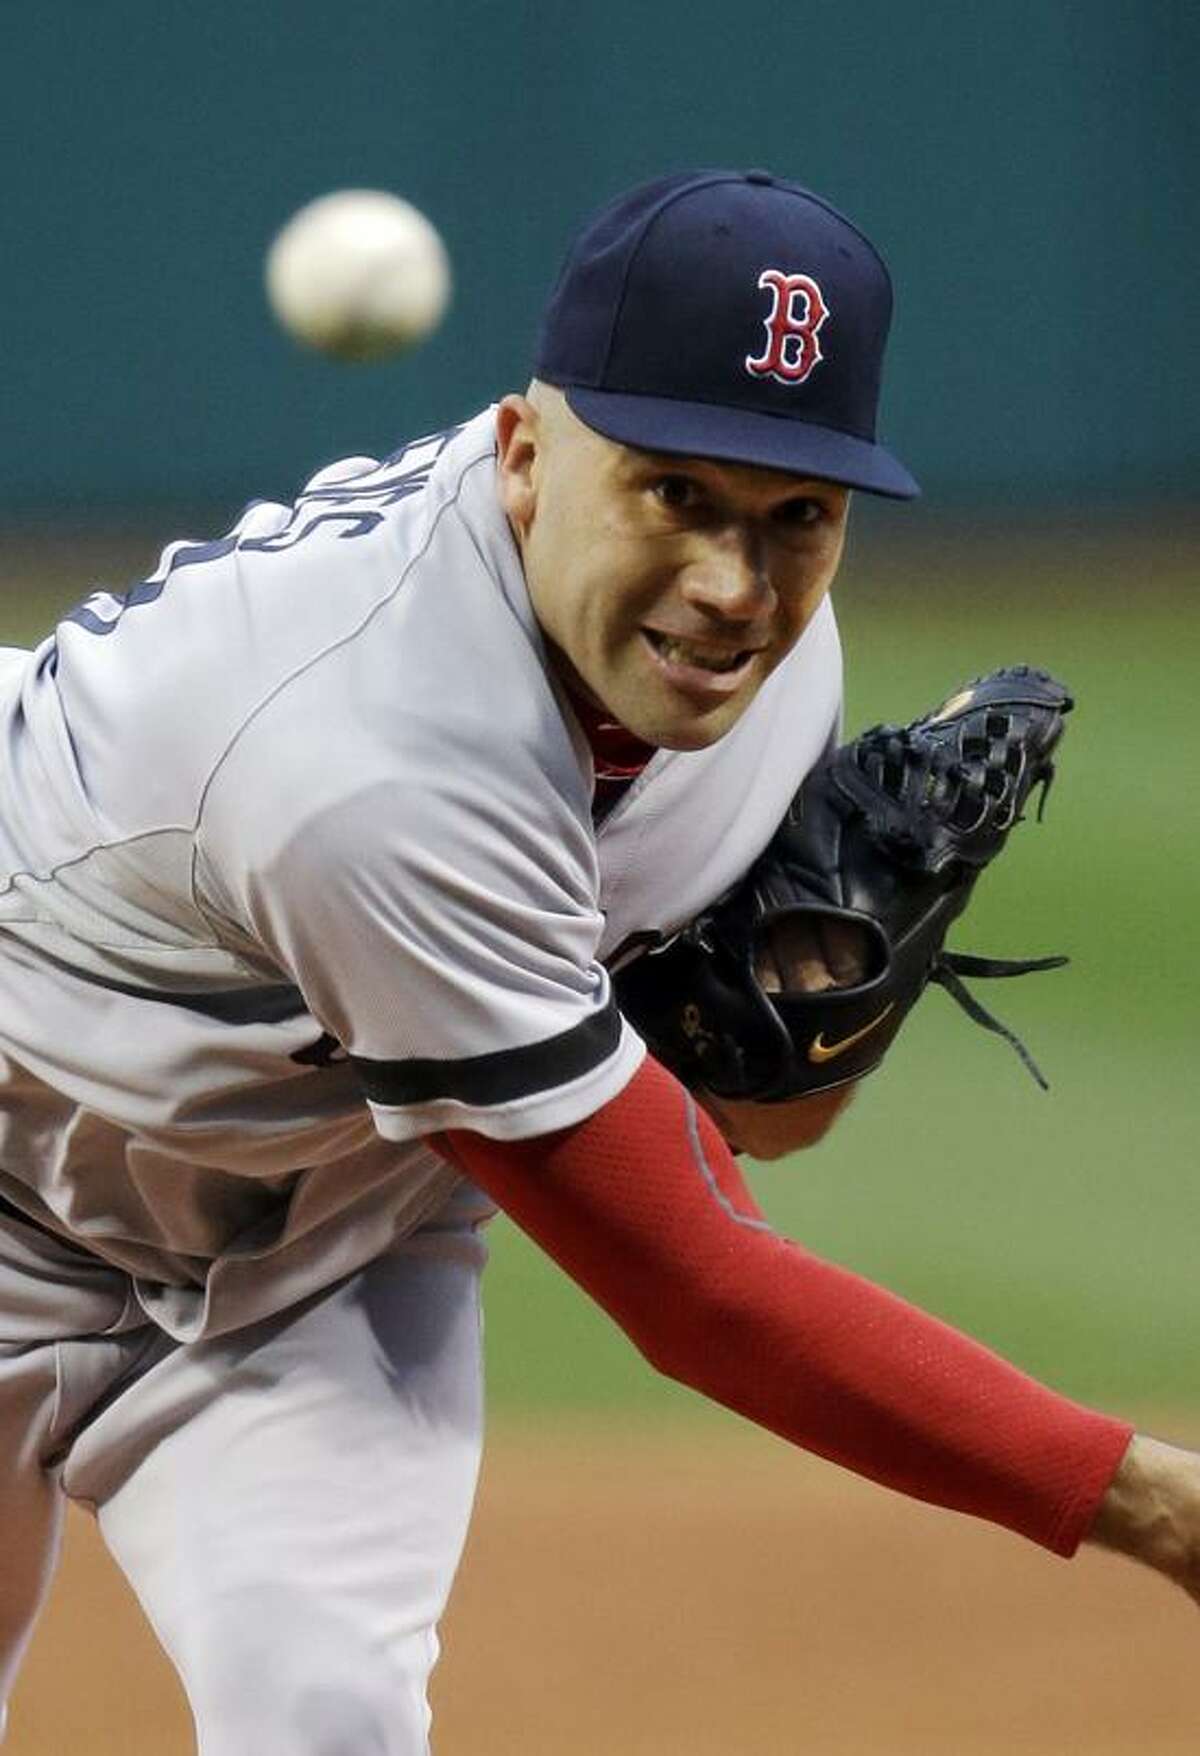 Boston Red Sox starting pitcher Alfredo Aceves delivers against the Cleveland Indians in the first inning of a baseball game Wednesday, April 17, 2013, in Cleveland. (AP Photo/Mark Duncan)